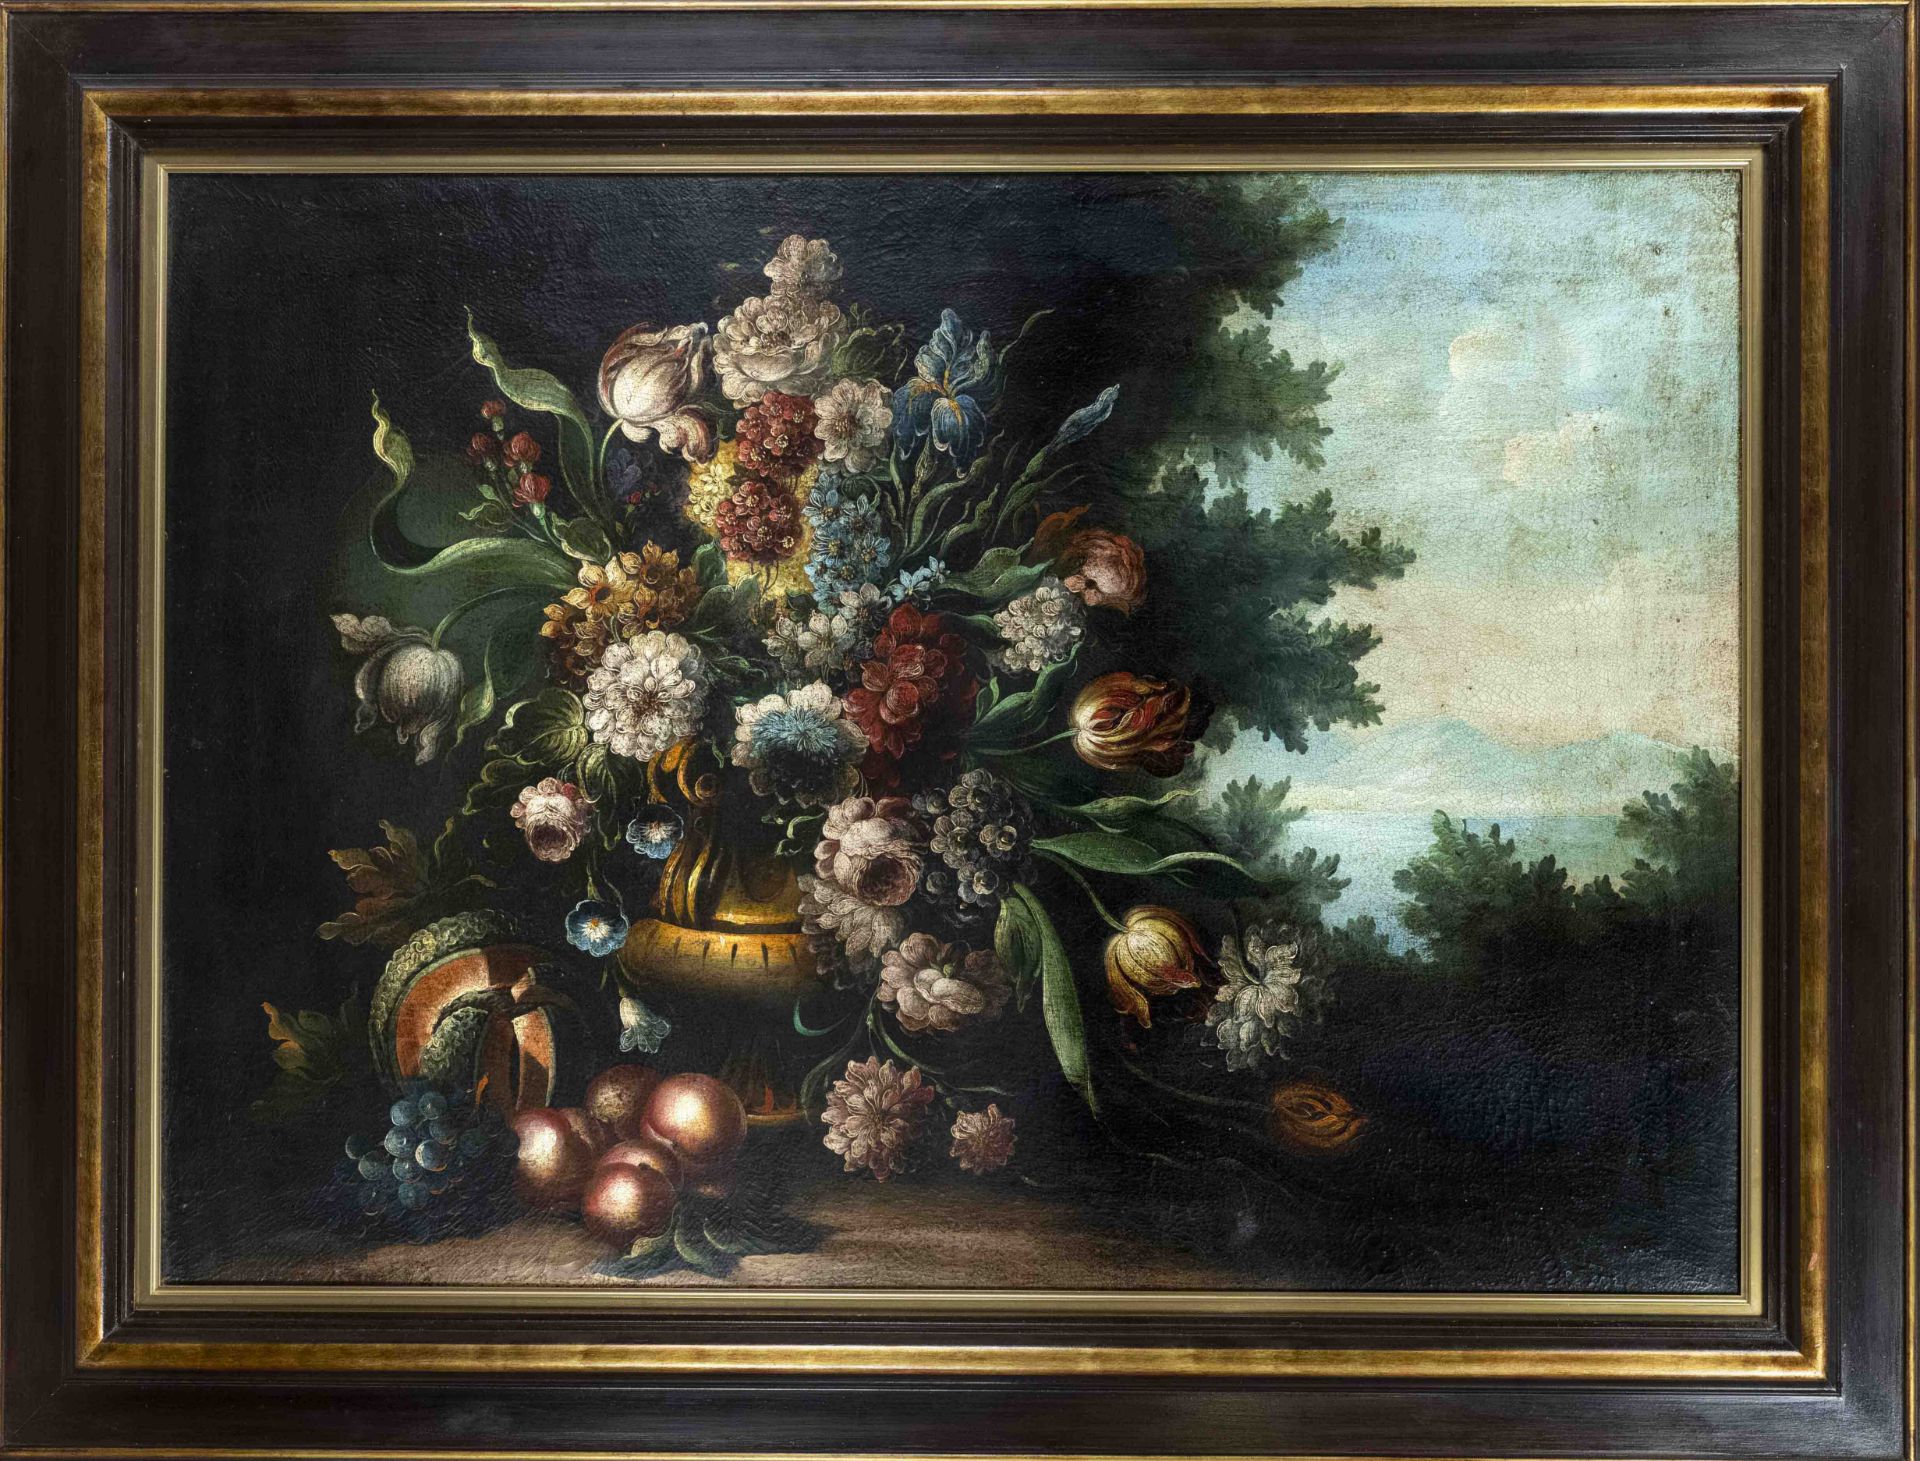 Anonymous artist early 20th century, large floral still life in the style of the 17th century, oil